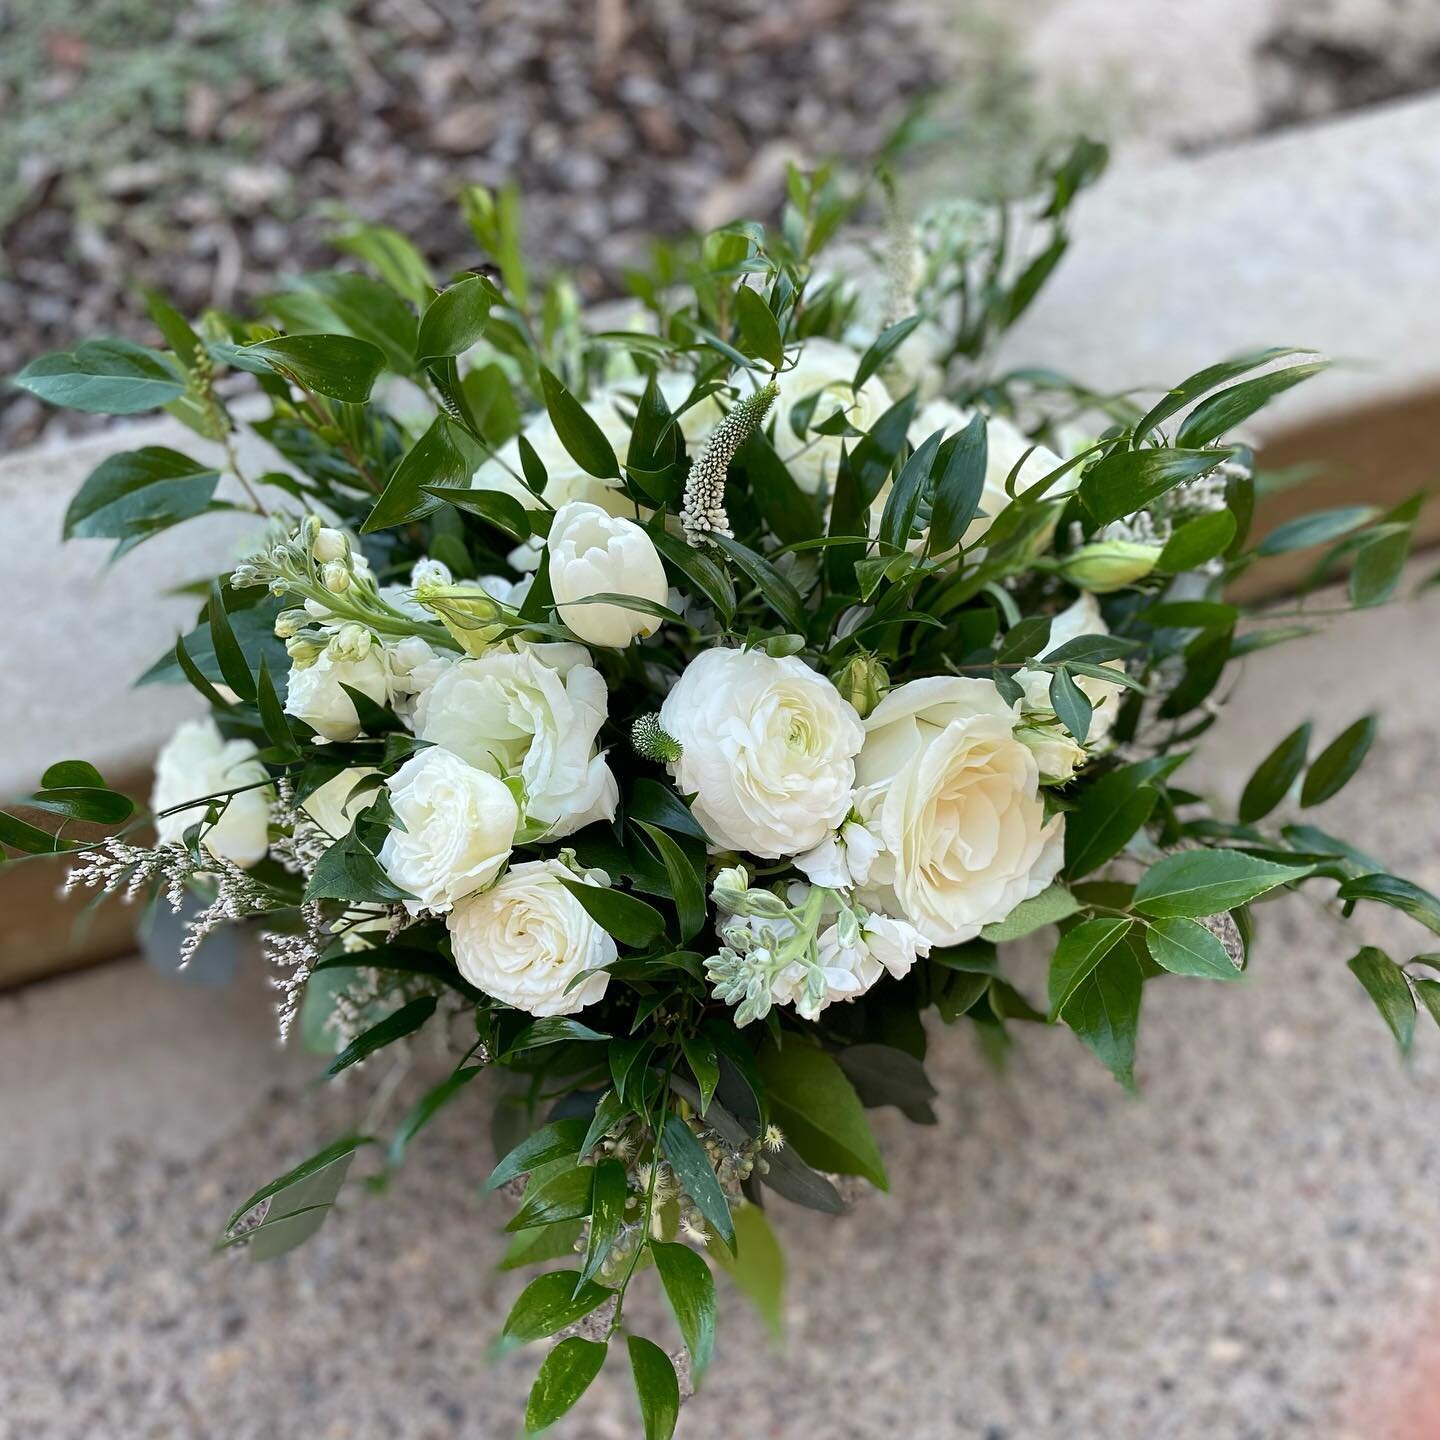 Green and white bridal bouquet 🤍
.
.
First 2 are the bride
3rd is bridesmaids 💍
.